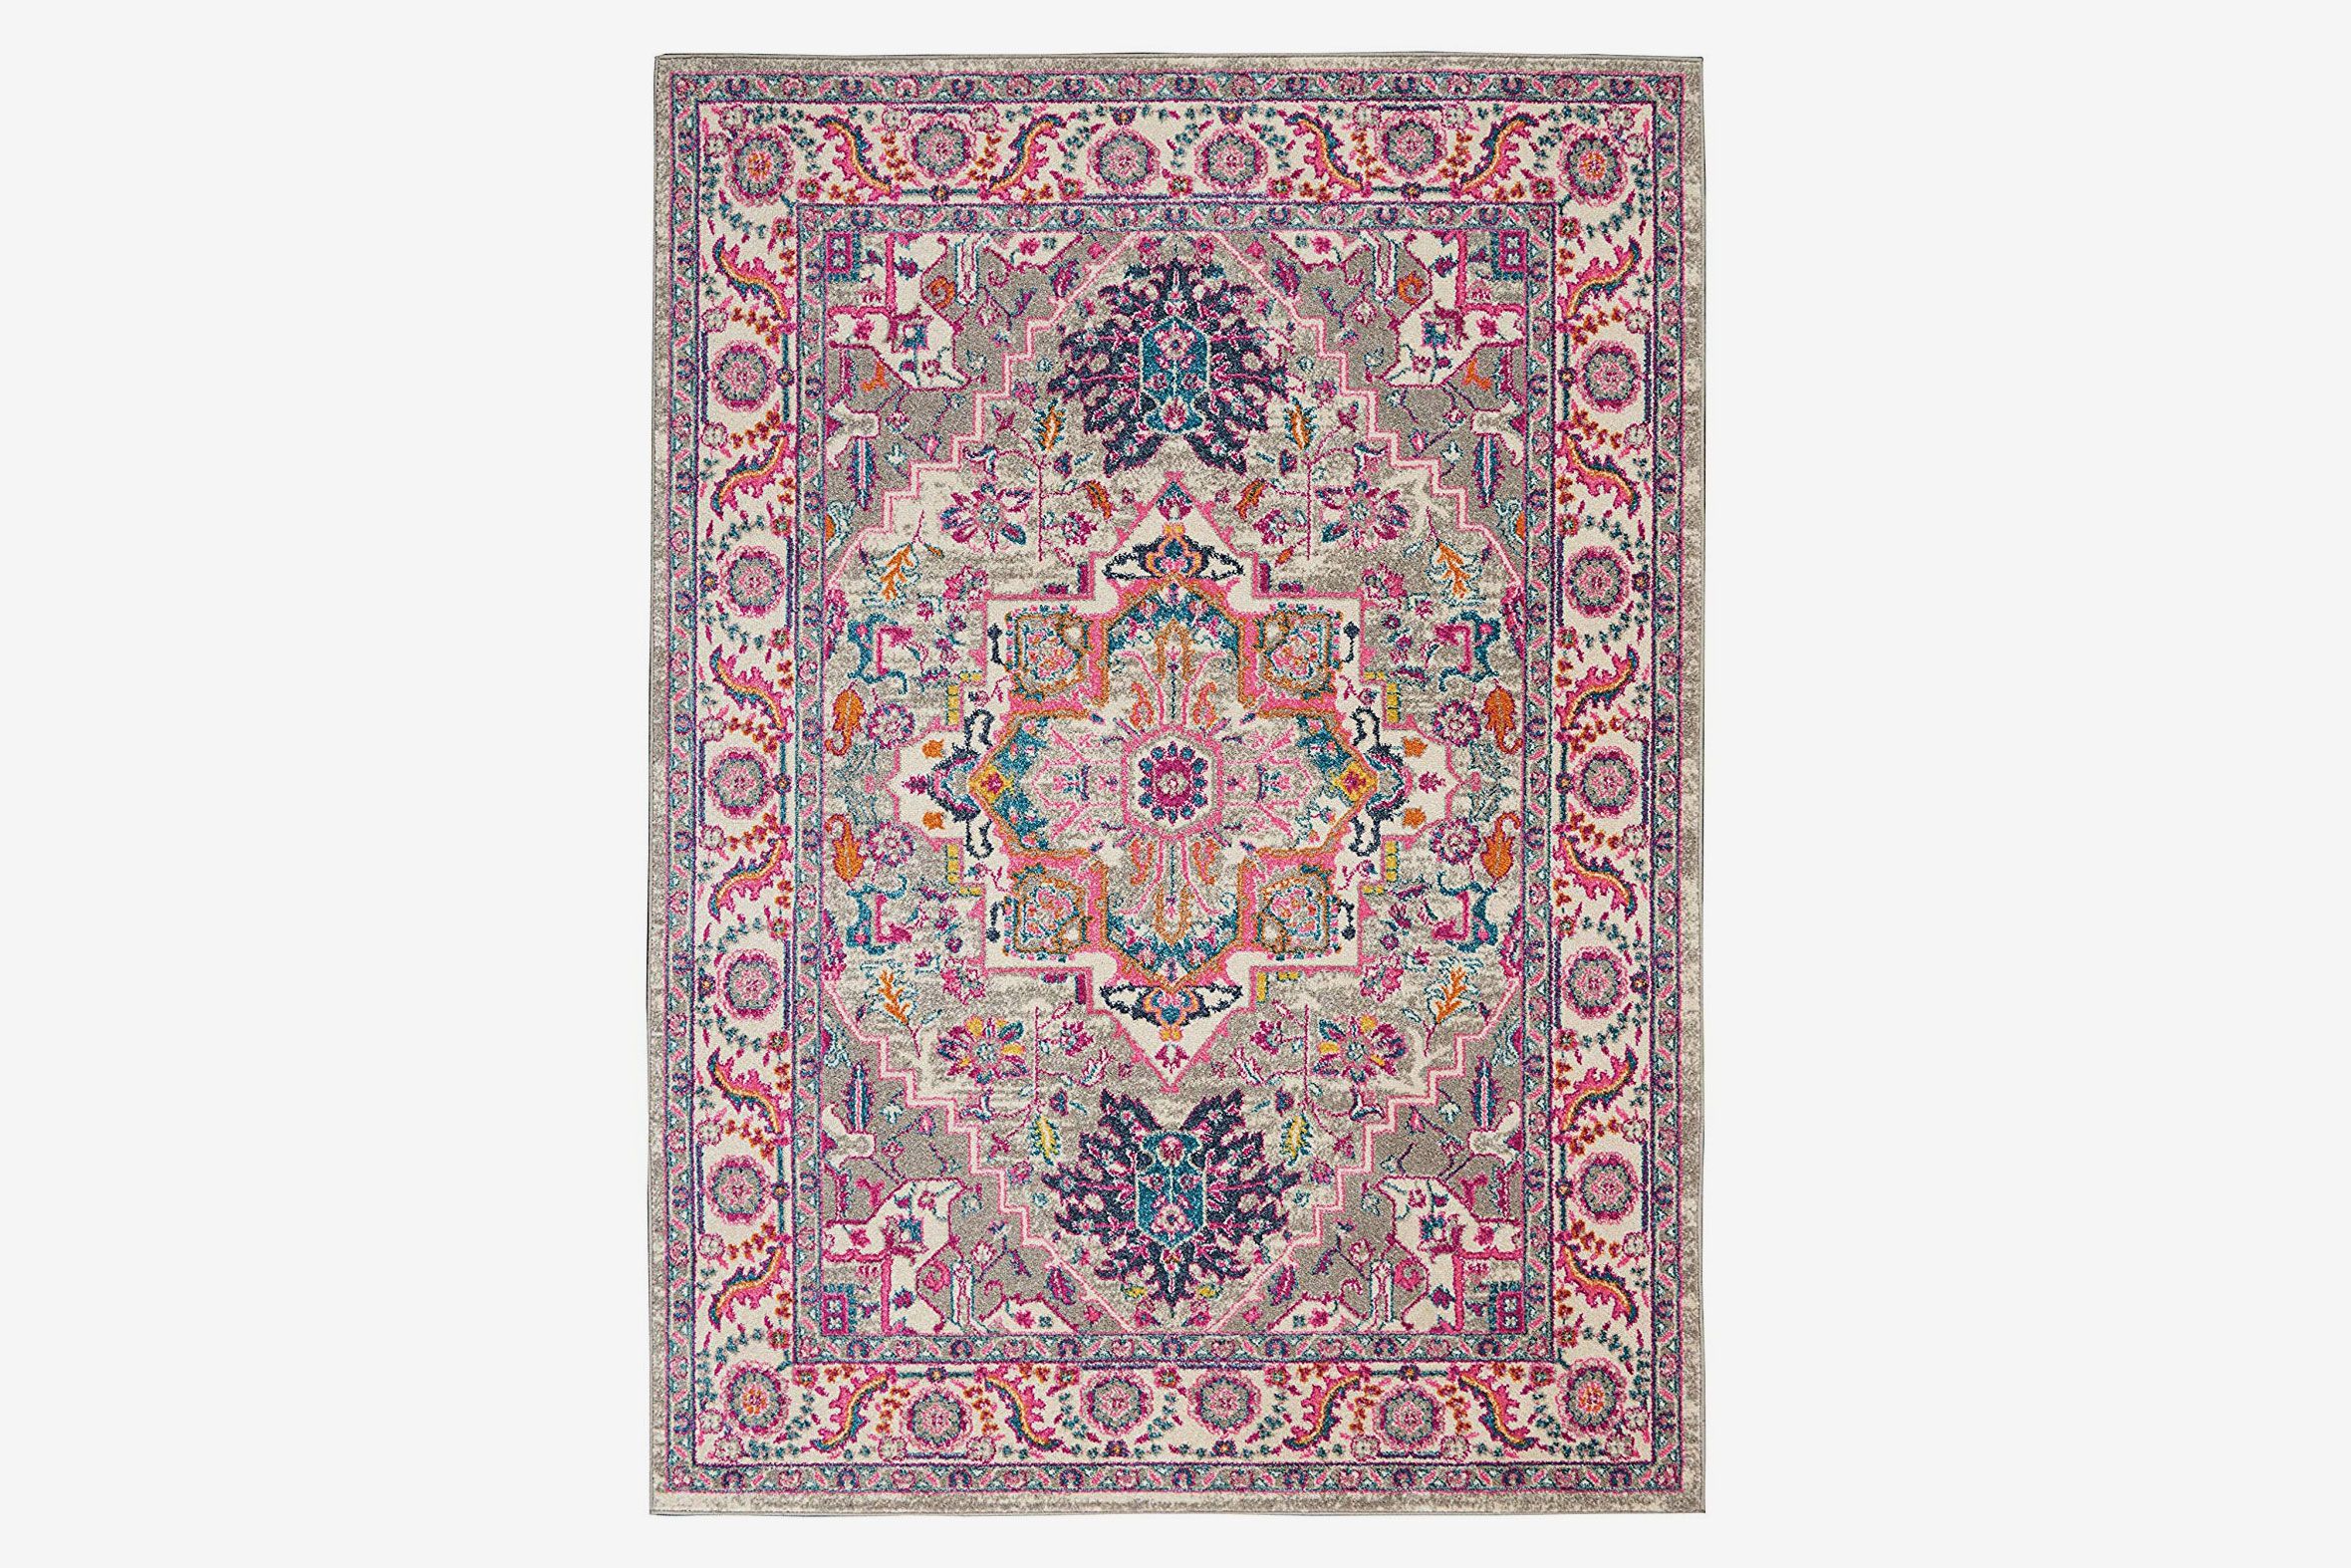 18 Cheap But Expensive-Looking Area Rugs 2019 | The Strategist